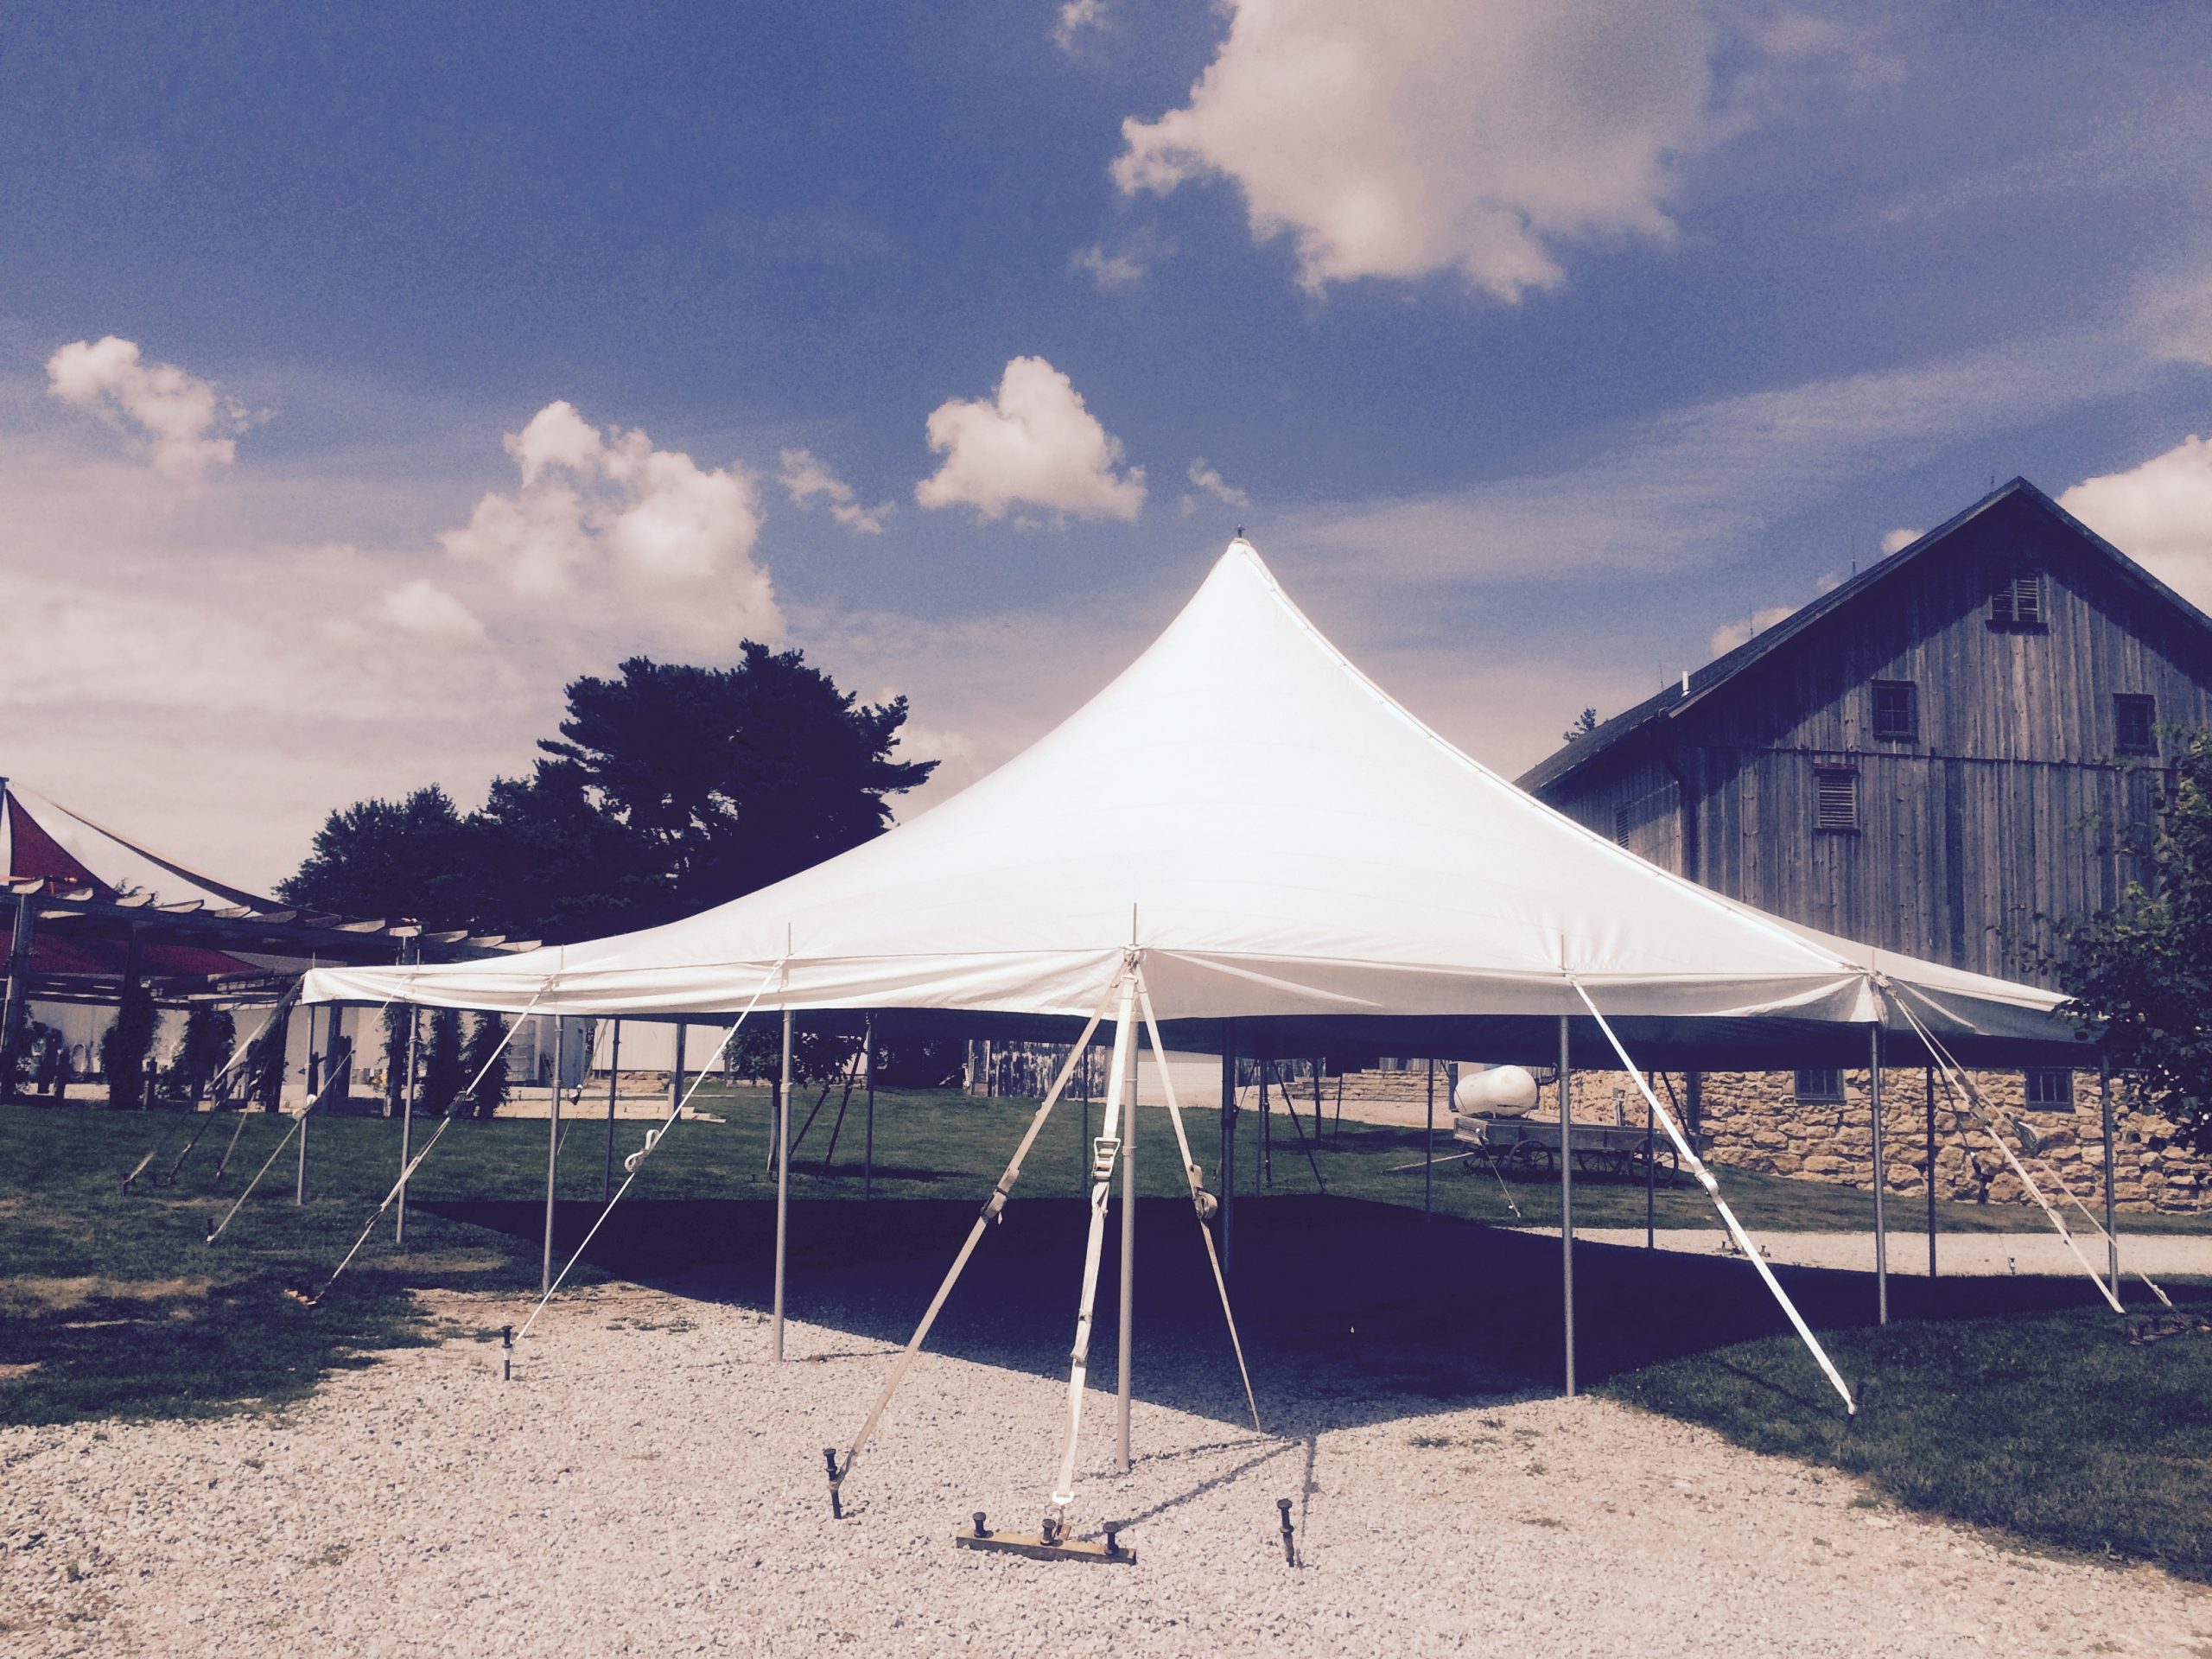 Tent at Sutliff Cider Company in front of the barn